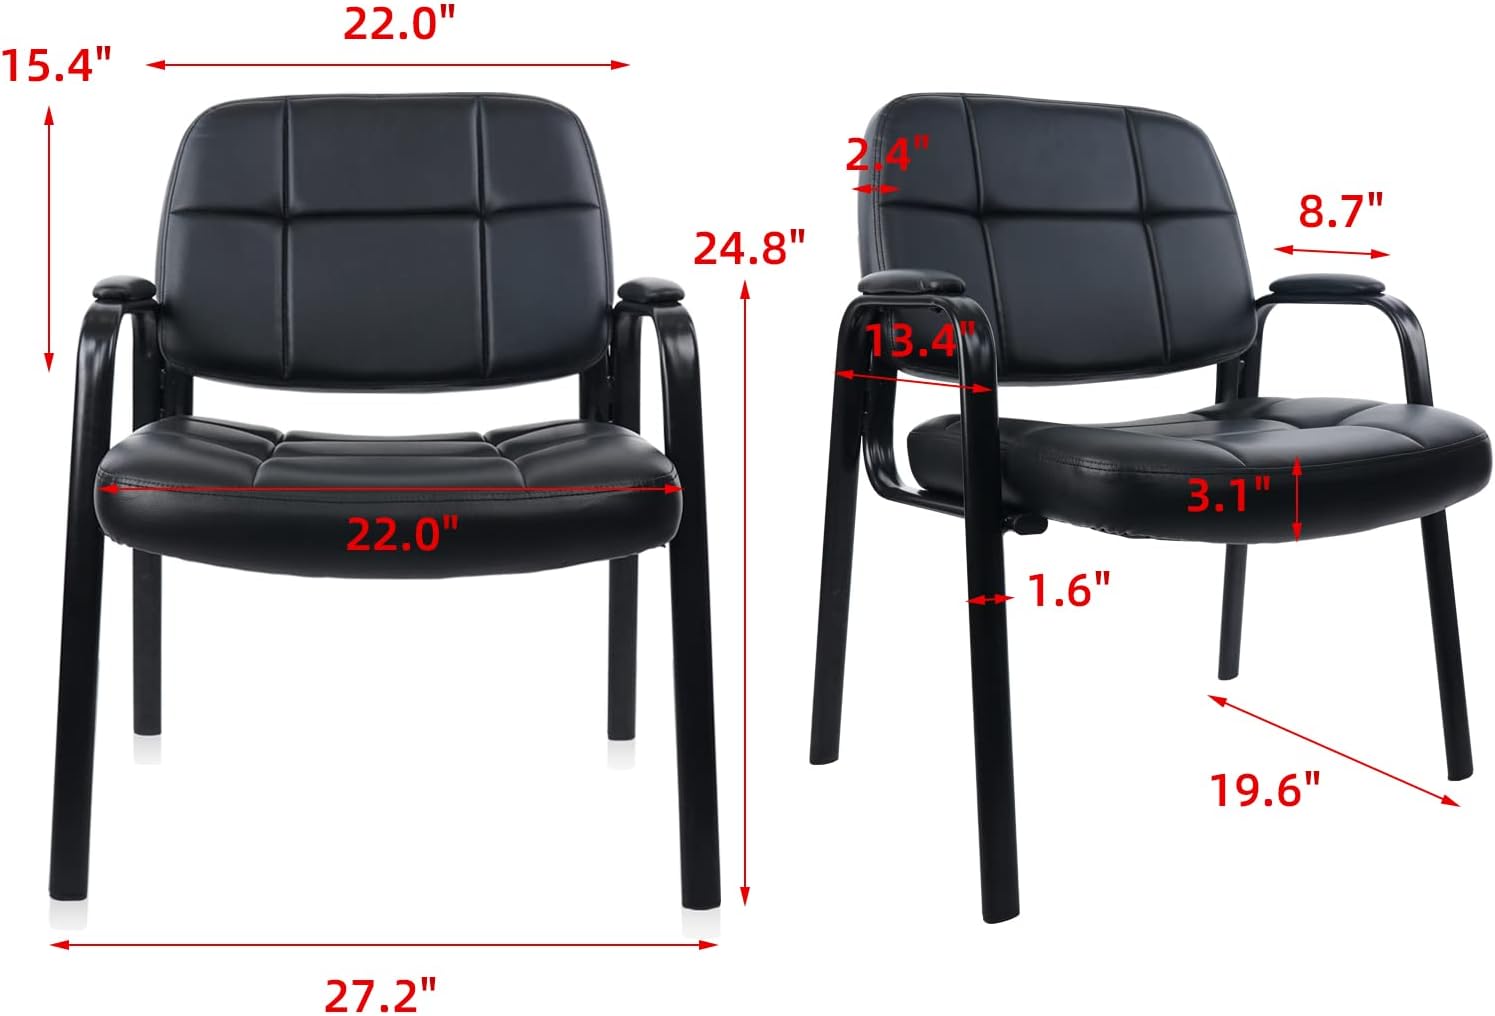 CLATINA Big & Tall 400lbs Waiting Room Guest Chair, Leather Office Reception Chair No Wheels with Padded Arms for Elderly Home Desk Conference Room Lobby Side Salon Clinic, Black(4 Pack) - image 3 of 8